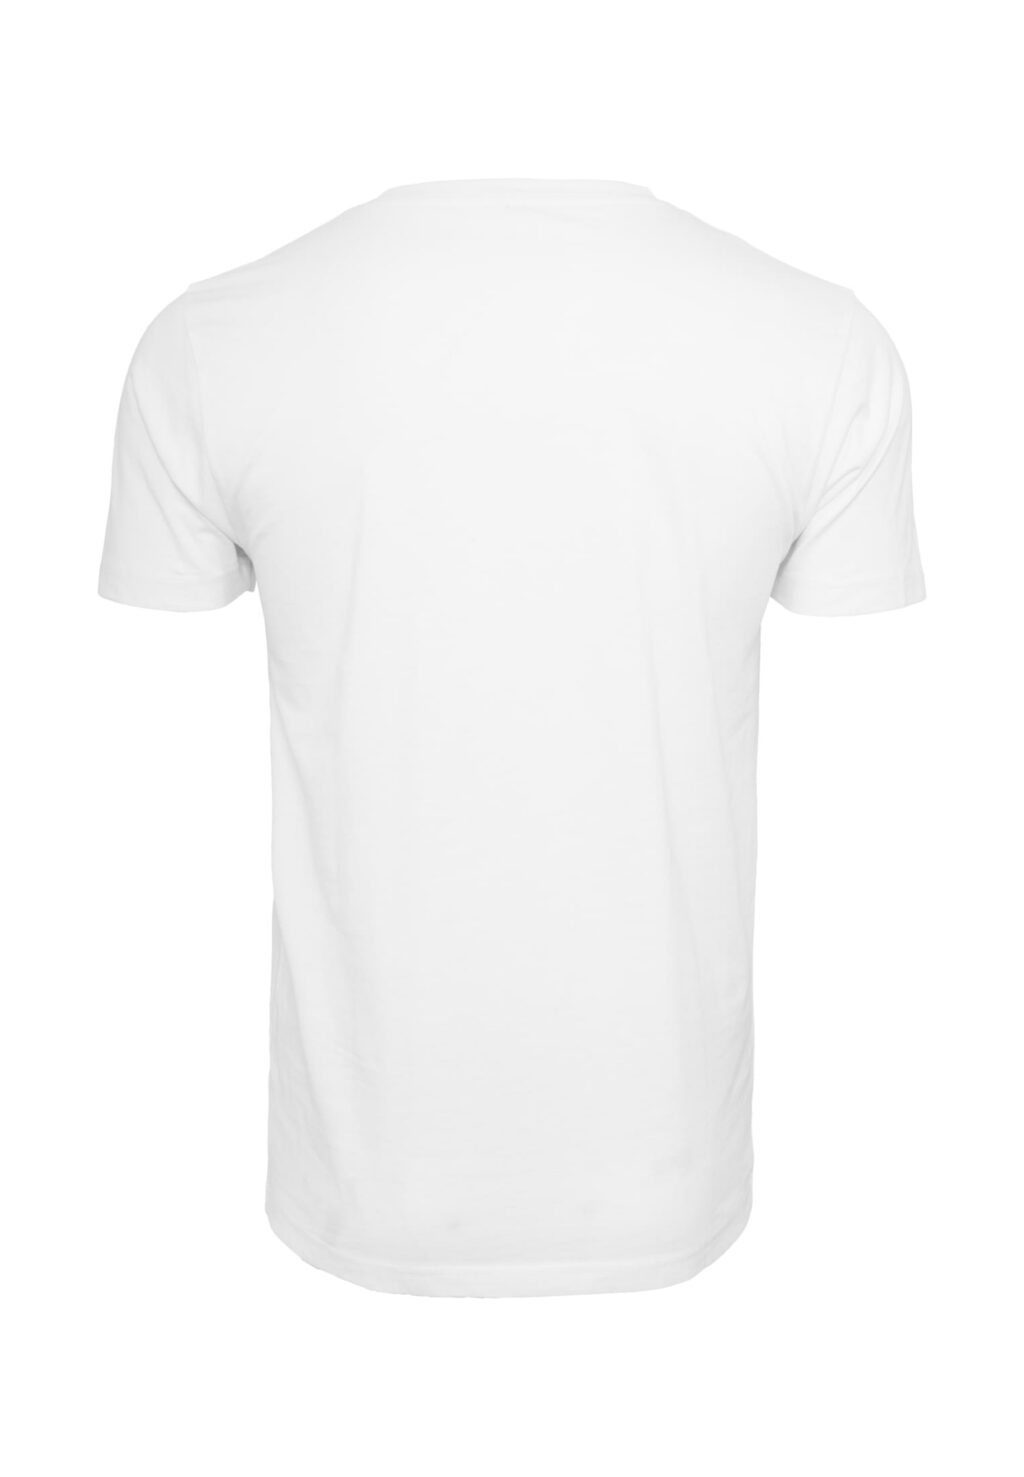 Cool As Ice Tee white MT2804